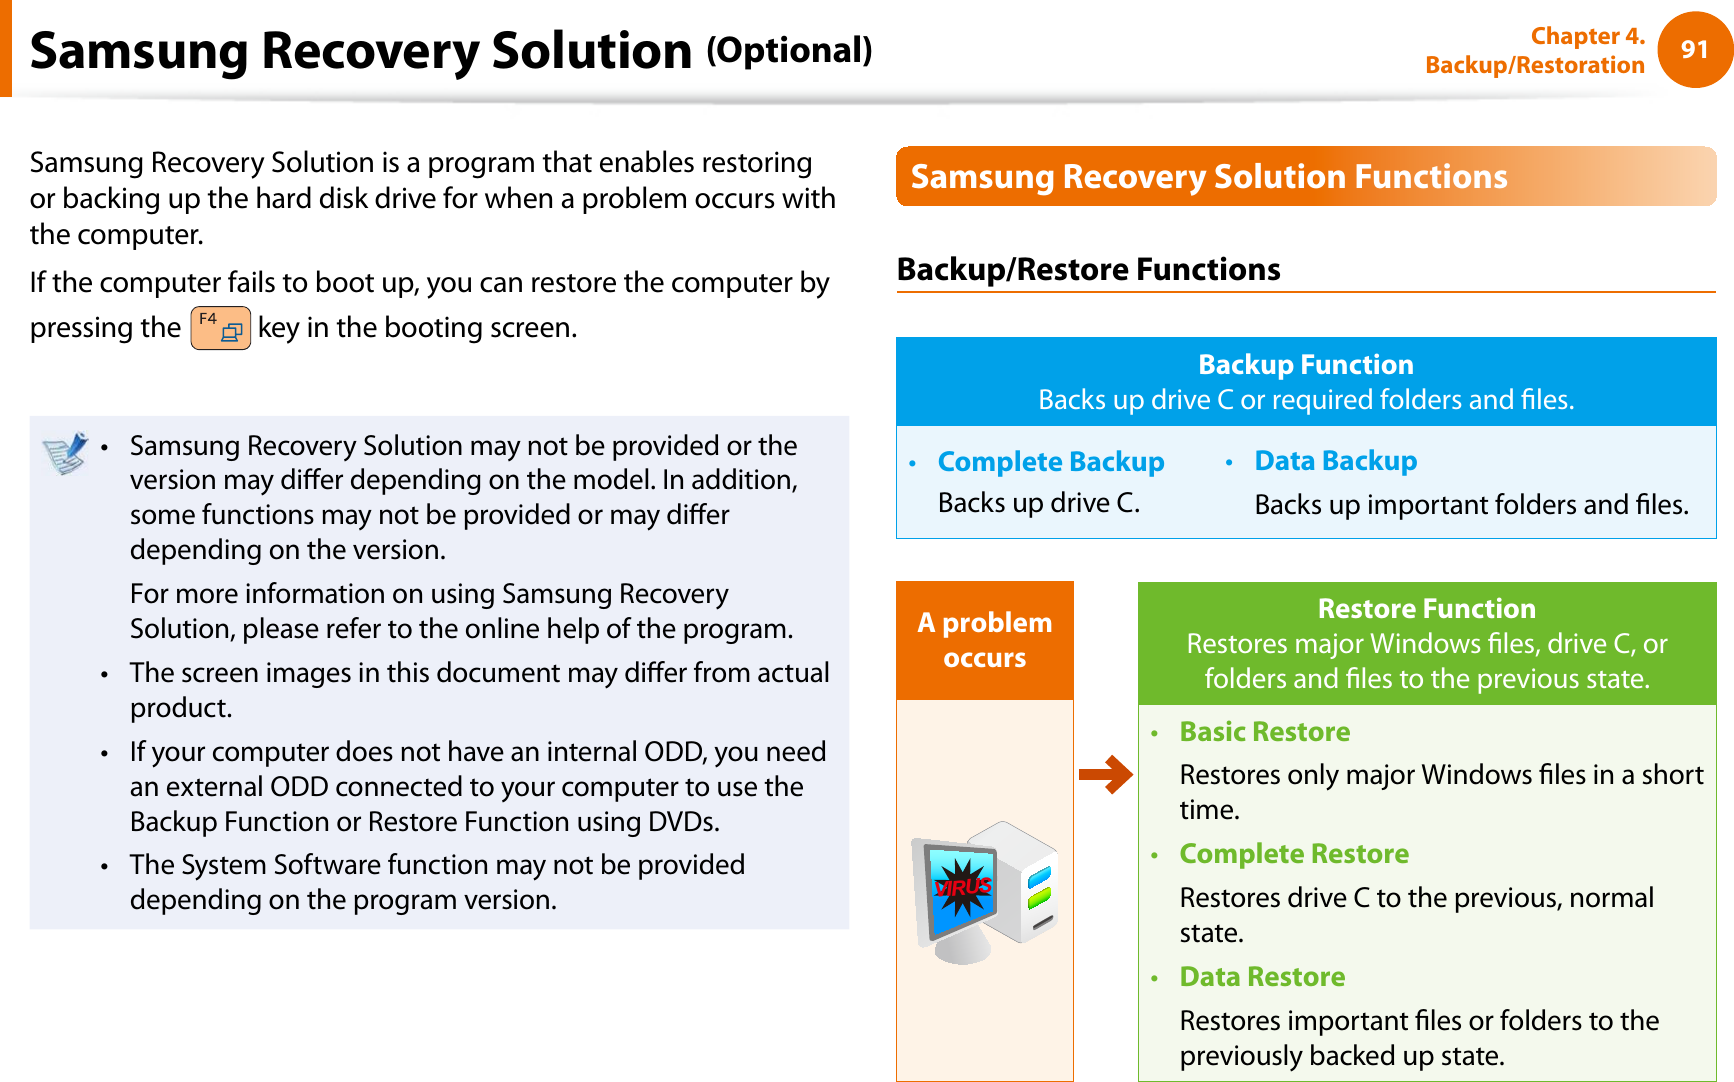 91Chapter 4. Backup/RestorationSamsung Recovery Solution (Optional)Samsung Recovery Solution is a program that enables restoring or backing up the hard disk drive for when a problem occurs with the computer.If the computer fails to boot up, you can restore the computer by pressing the   key in the booting screen.Samsung Recovery Solution may not be provided or the tversion may dier depending on the model. In addition, some functions may not be provided or may dier depending on the version.For more information on using Samsung Recovery Solution, please refer to the online help of the program.The screen images in this document may dier from actual tproduct.If your computer does not have an internal ODD, you need tan external ODD connected to your computer to use the Backup Function or Restore Function using DVDs.The System Software function may not be provided tdepending on the program version.Samsung Recovery Solution FunctionsBackup/Restore FunctionsBackup FunctionBacks up drive C or required folders and les.Complete BackuptBacks up drive C.Data BackuptBacks up important folders and les.A problem occursVIRUSRestore FunctionRestores major Windows les, drive C, or folders and les to the previous state.Basic RestoretRestores only major Windows les in a short time.Complete RestoretRestores drive C to the previous, normal state.Data RestoretRestores important les or folders to the previously backed up state.